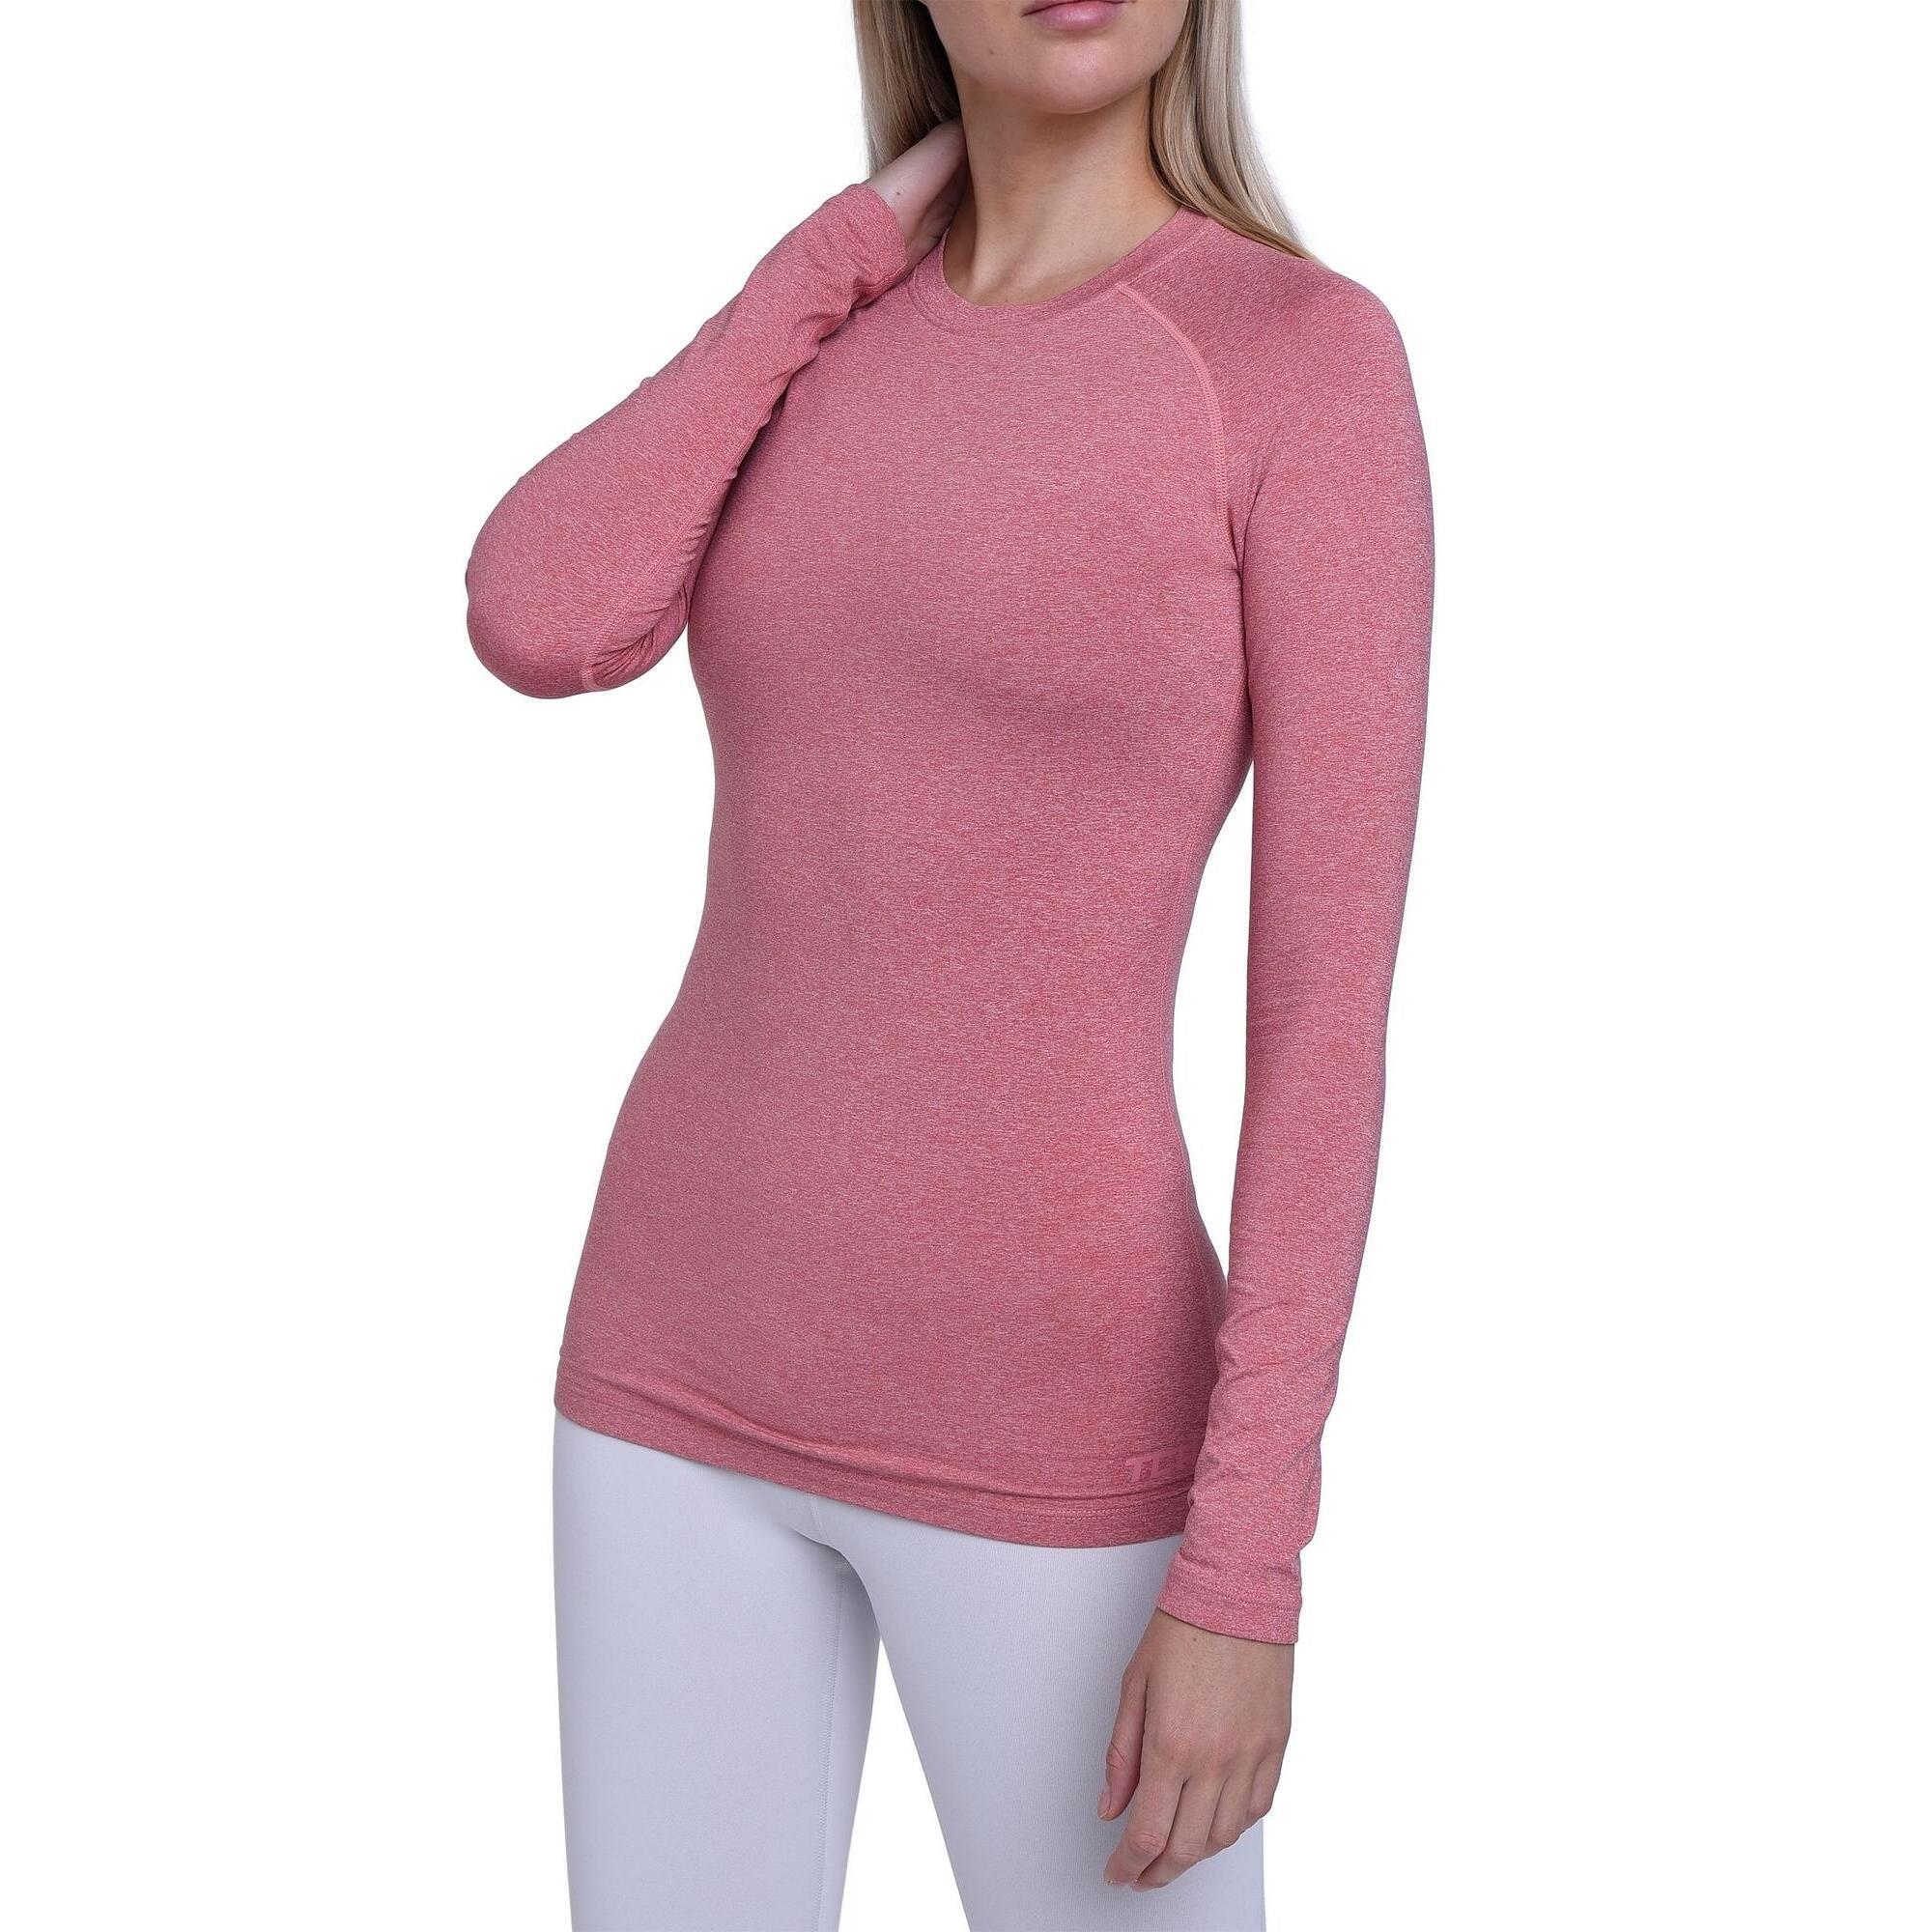 TCA Women's Super Thermal Base Layer Top - Dusty Rose